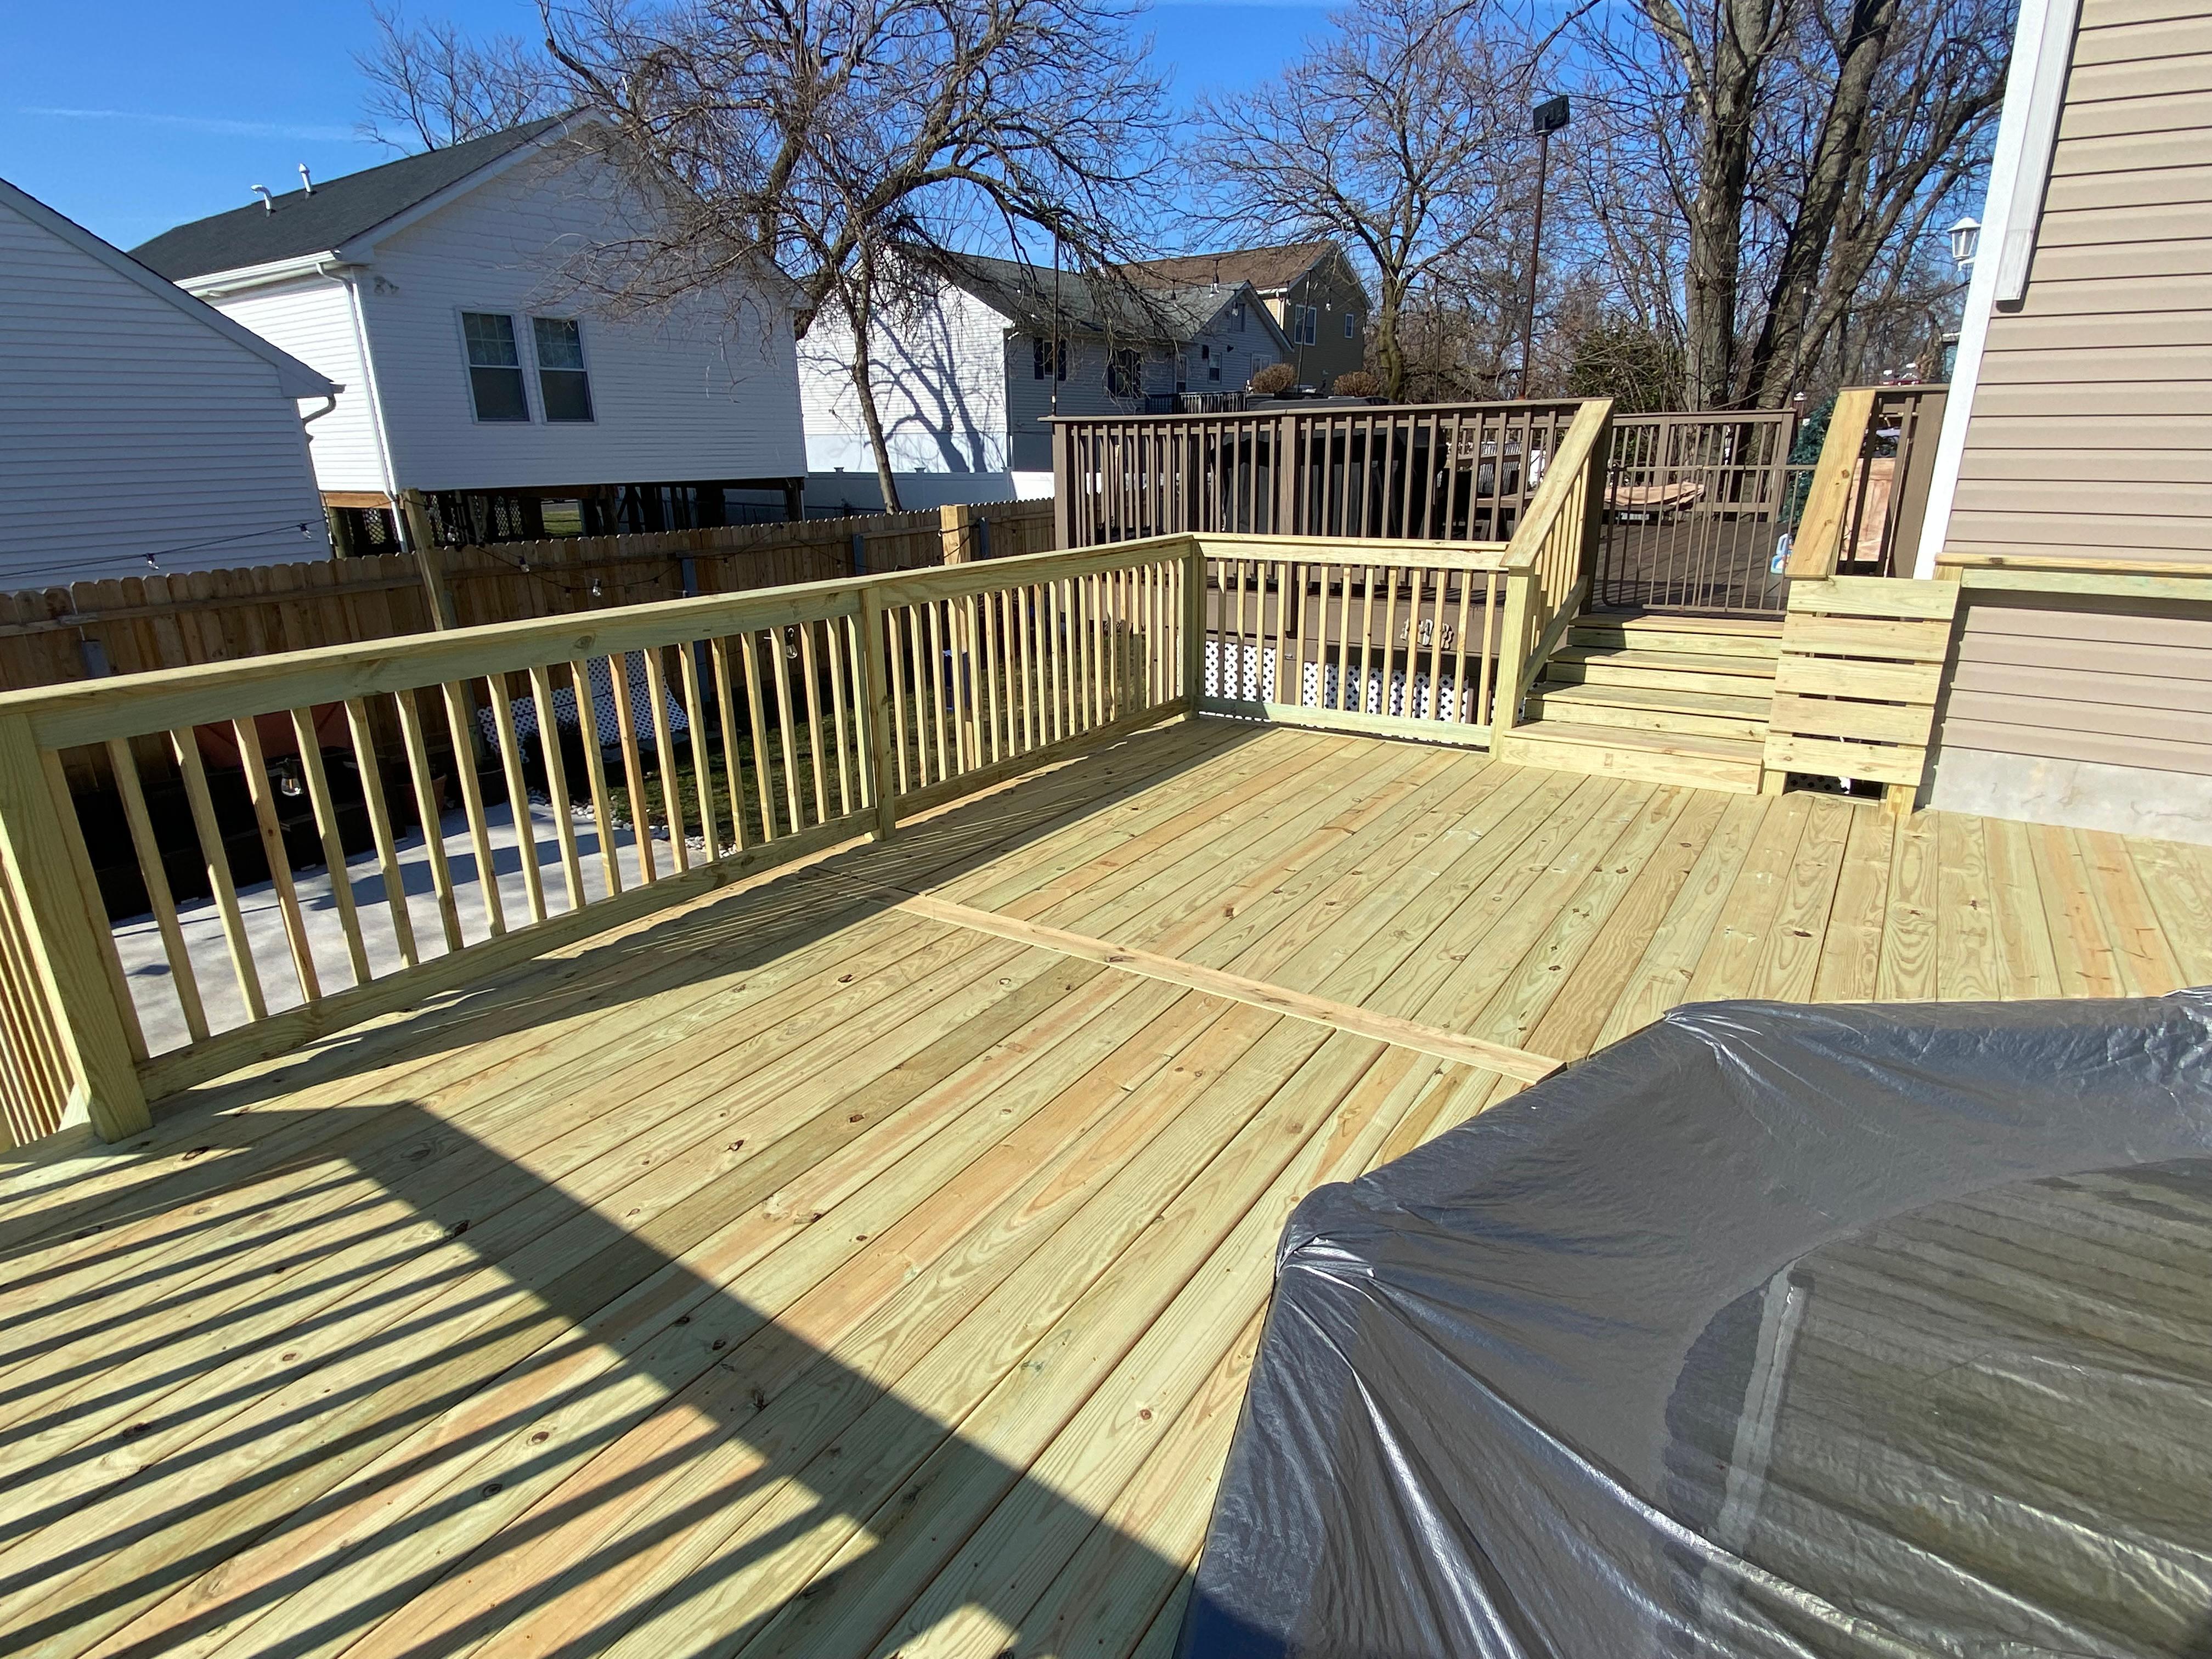 Trust KDH Contracting LLC for top-tier deck construction services. We handle every aspect of the construction process, from design to finishing touches, ensuring your deck meets the highest standards of quality and craftsmanship.